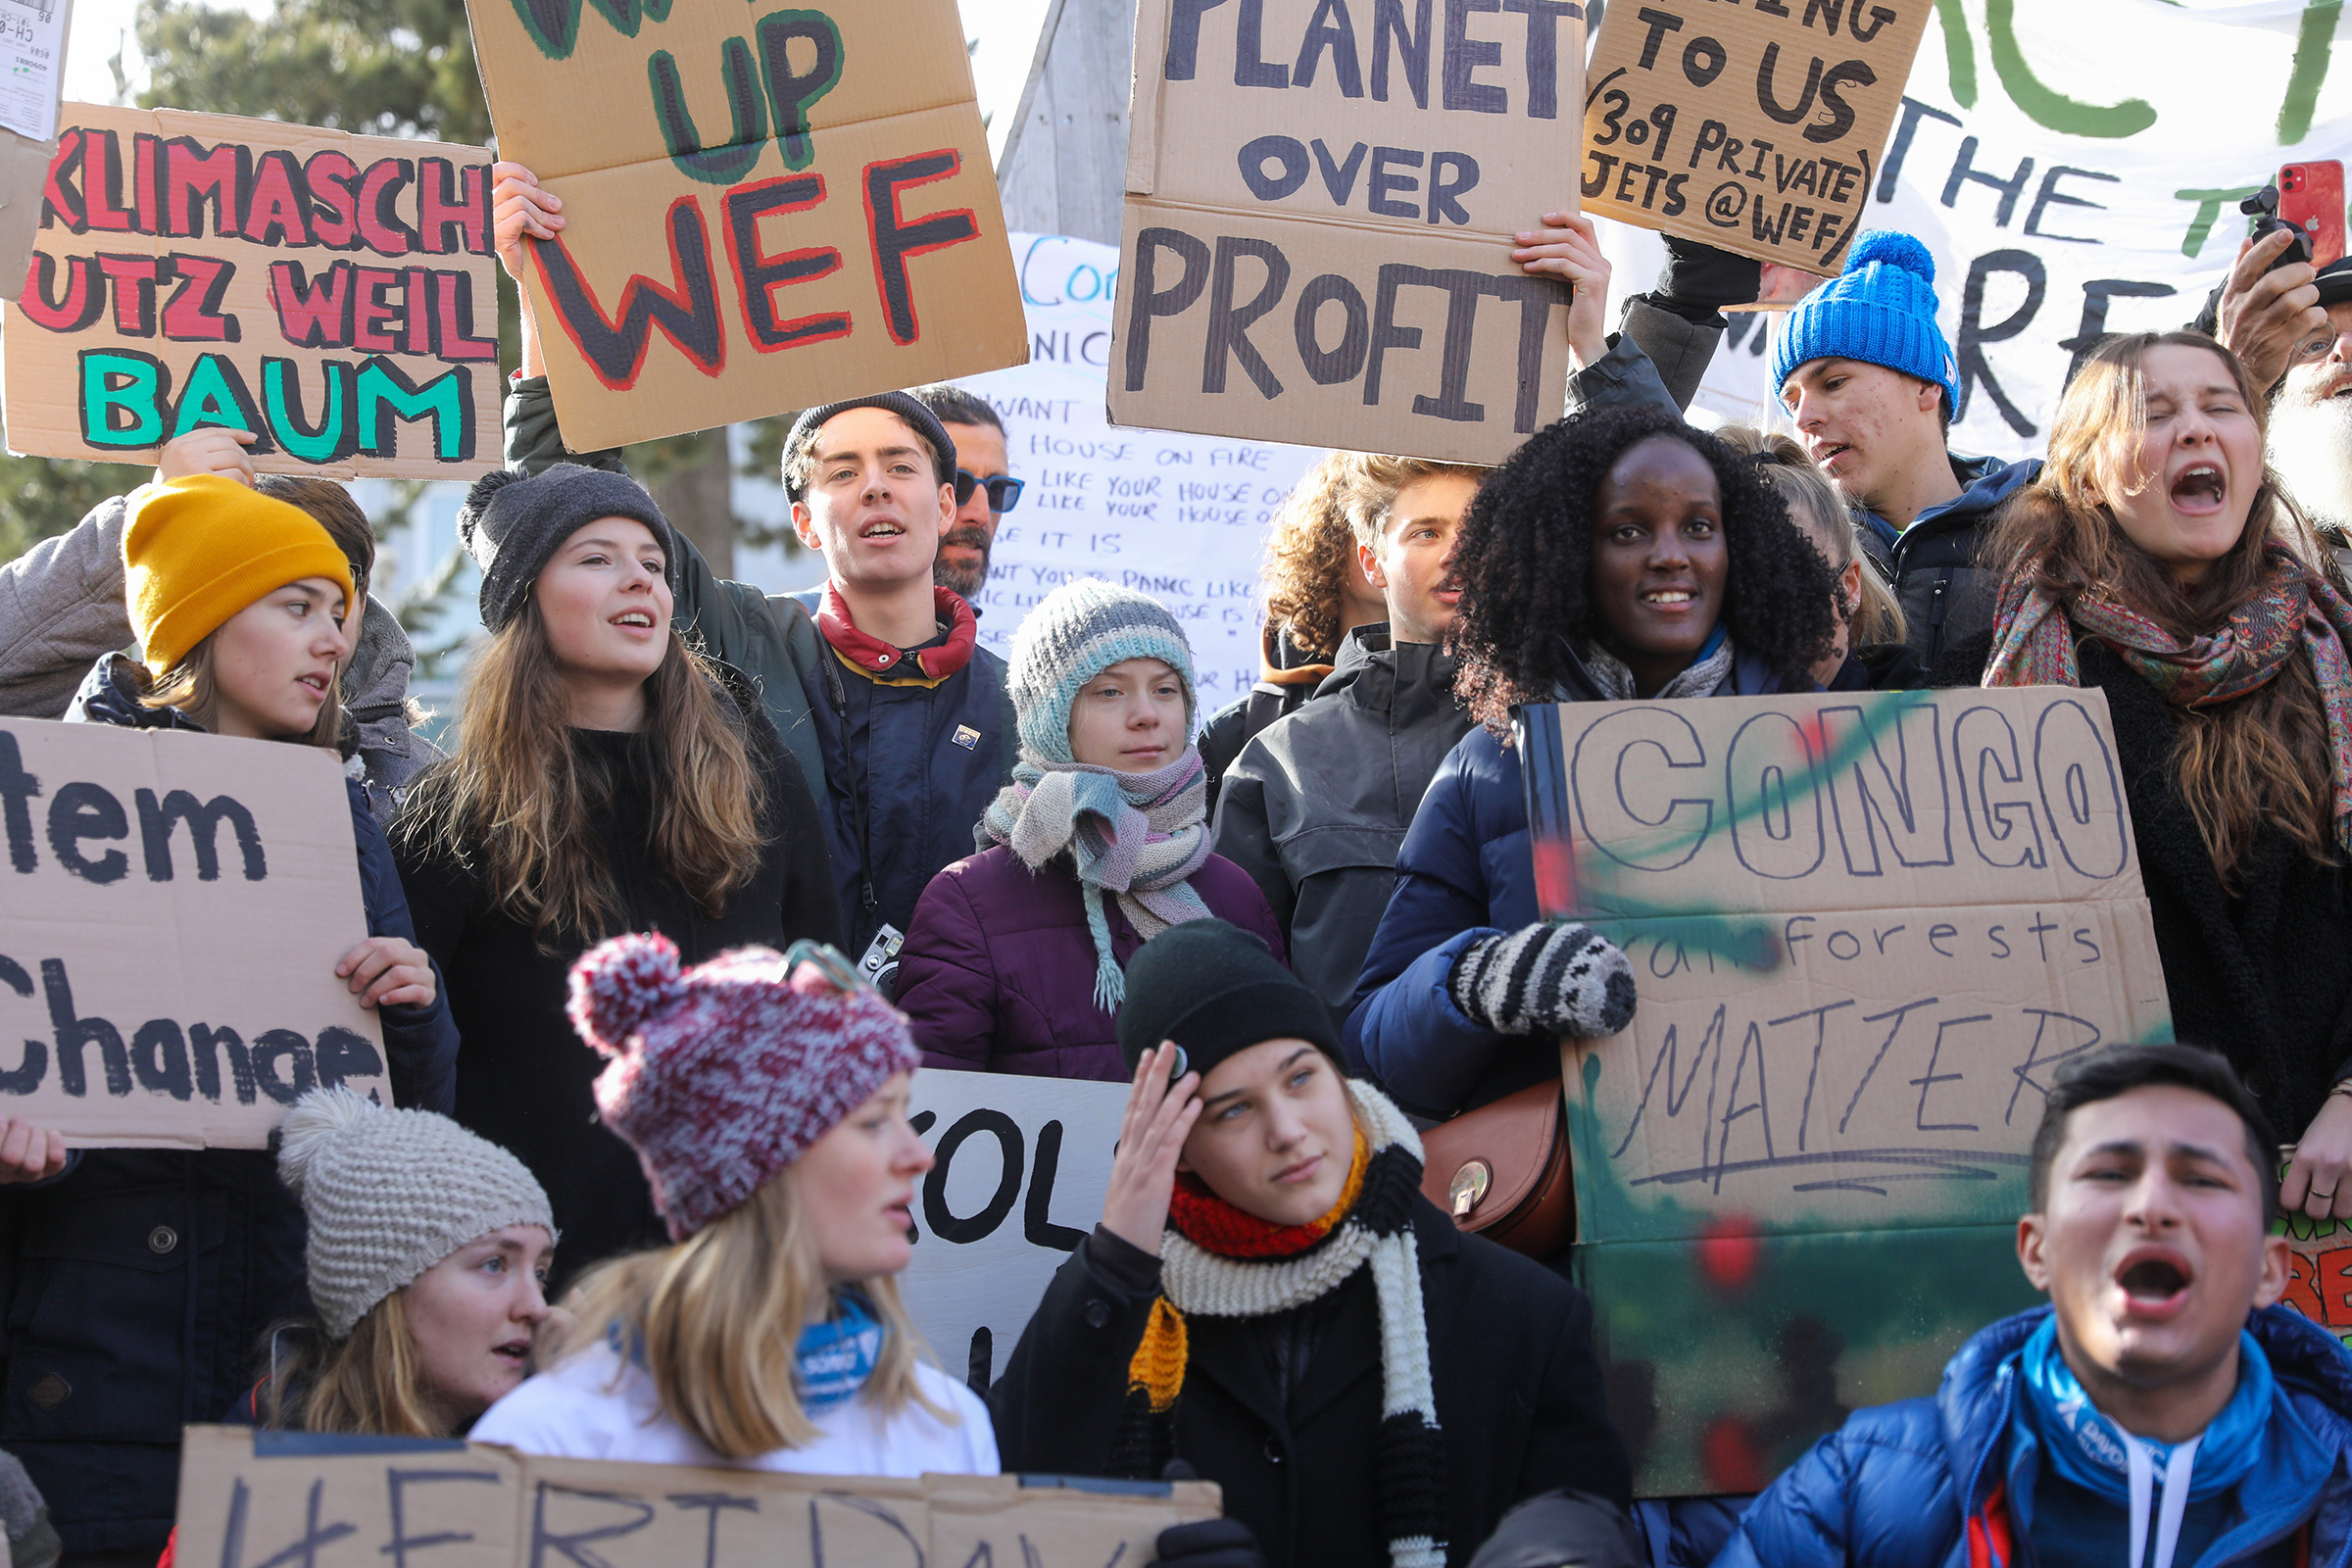 Nakate and other climate activists, including Greta Thunberg, Isabelle Axelsson and Luisa Neubauer, demonstrate during the World Economic Forum in Davos, Switzerland on Jan. 24, 2020.